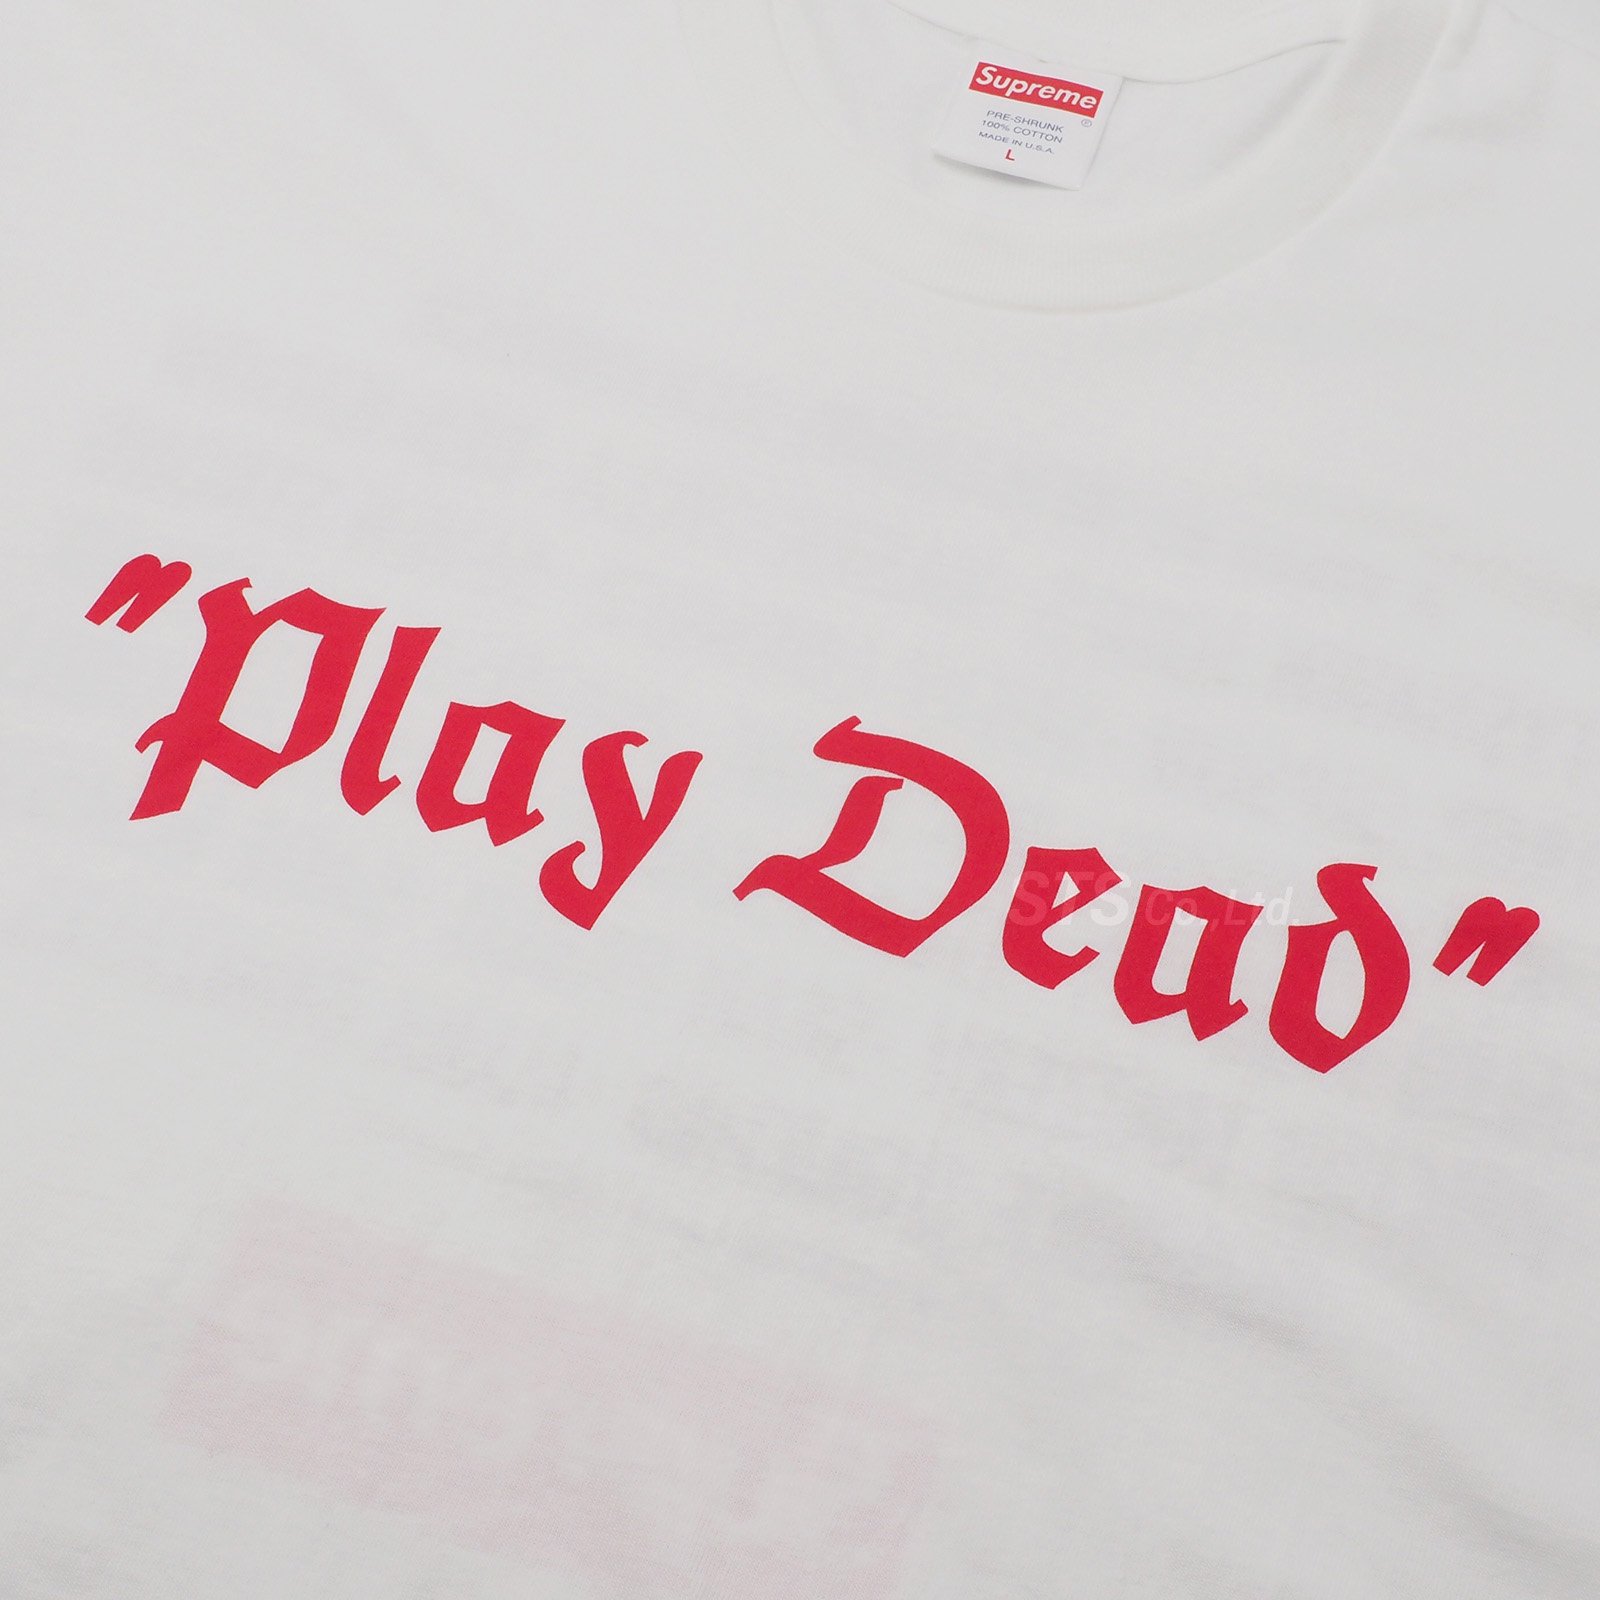 Supreme - Play Dead Tee - ParkSIDER